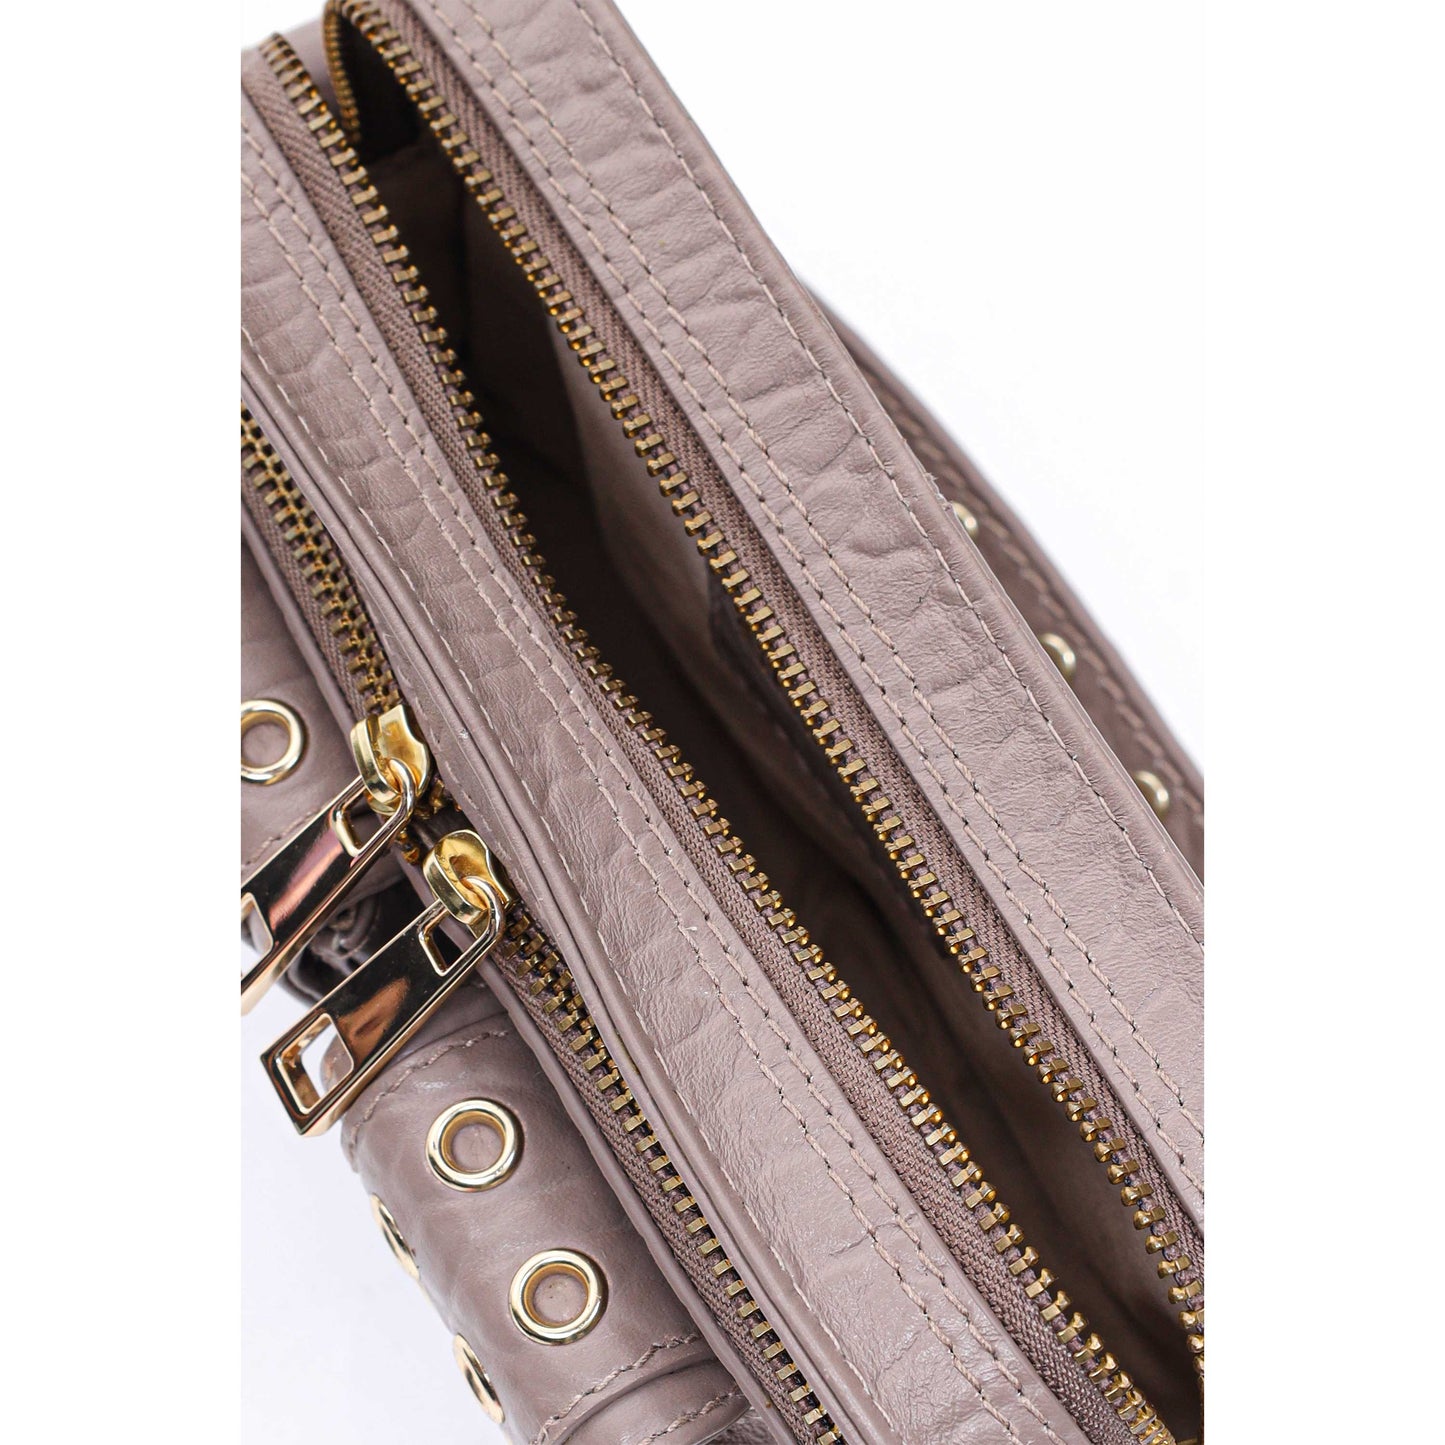 Núnoo Helena Eyelet New Zealand Taupe w. Gold Shoulder bags Taupe